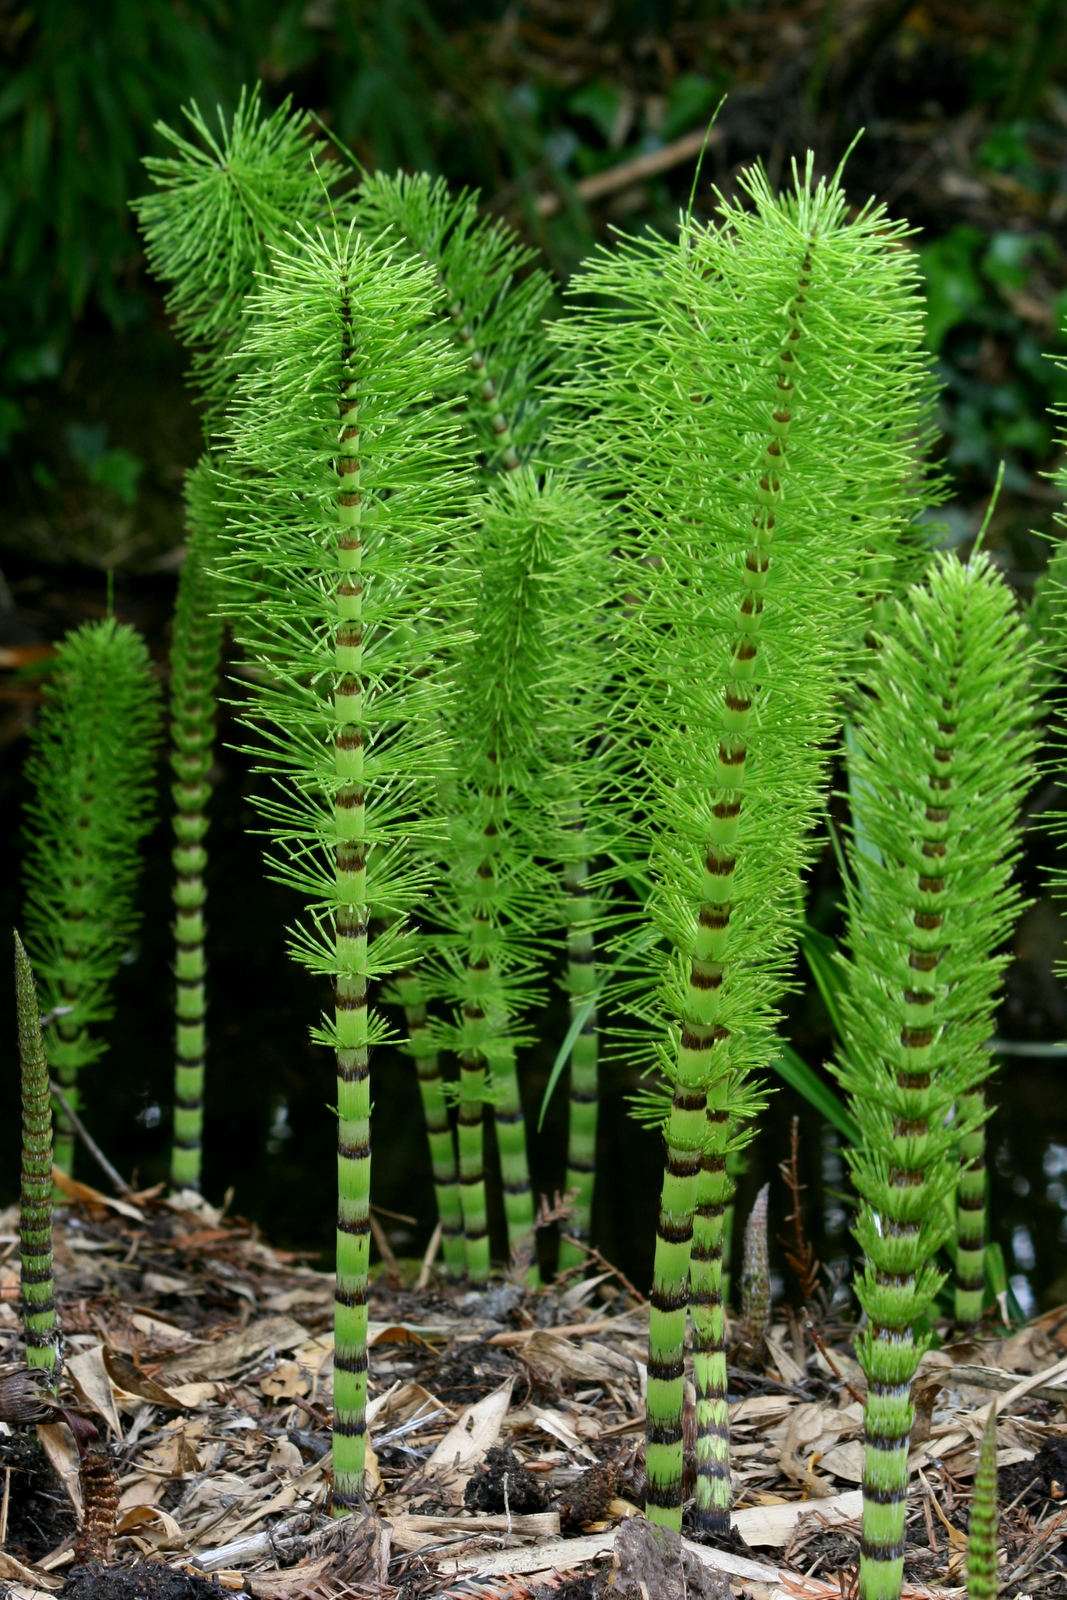  Vegetative shoots of&nbsp; Equisetum telematia&nbsp; with megaphylls in whorls surrounding a central stem. Photo: Rror 2008. Source Wikimedia Commons.  